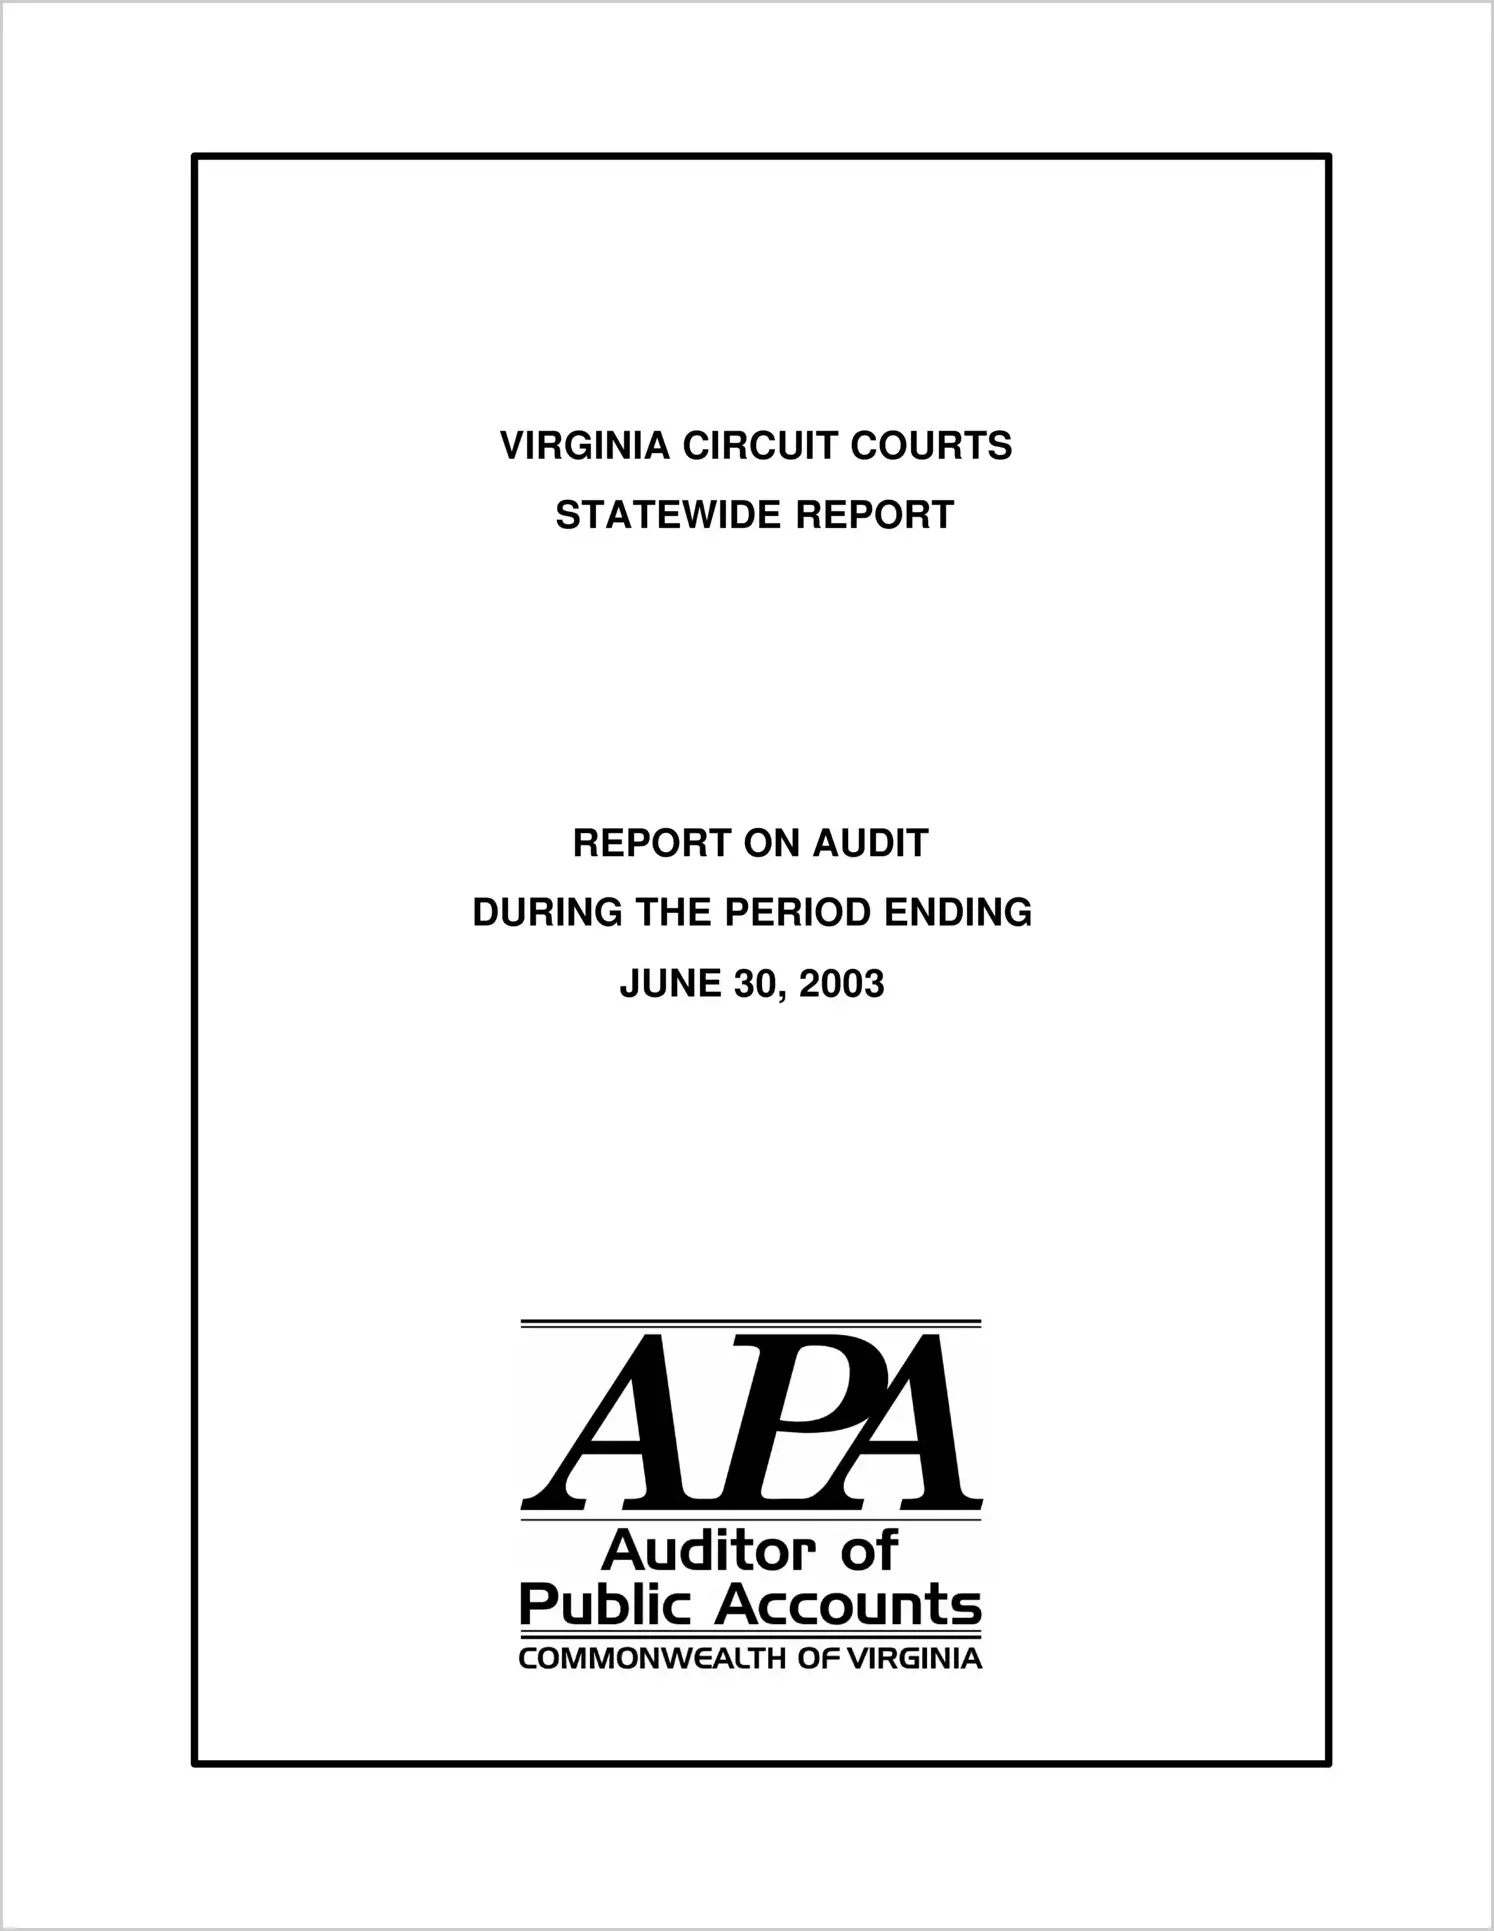 Virginia Circuit Courts Statewide Report during the period ending June 30, 2003